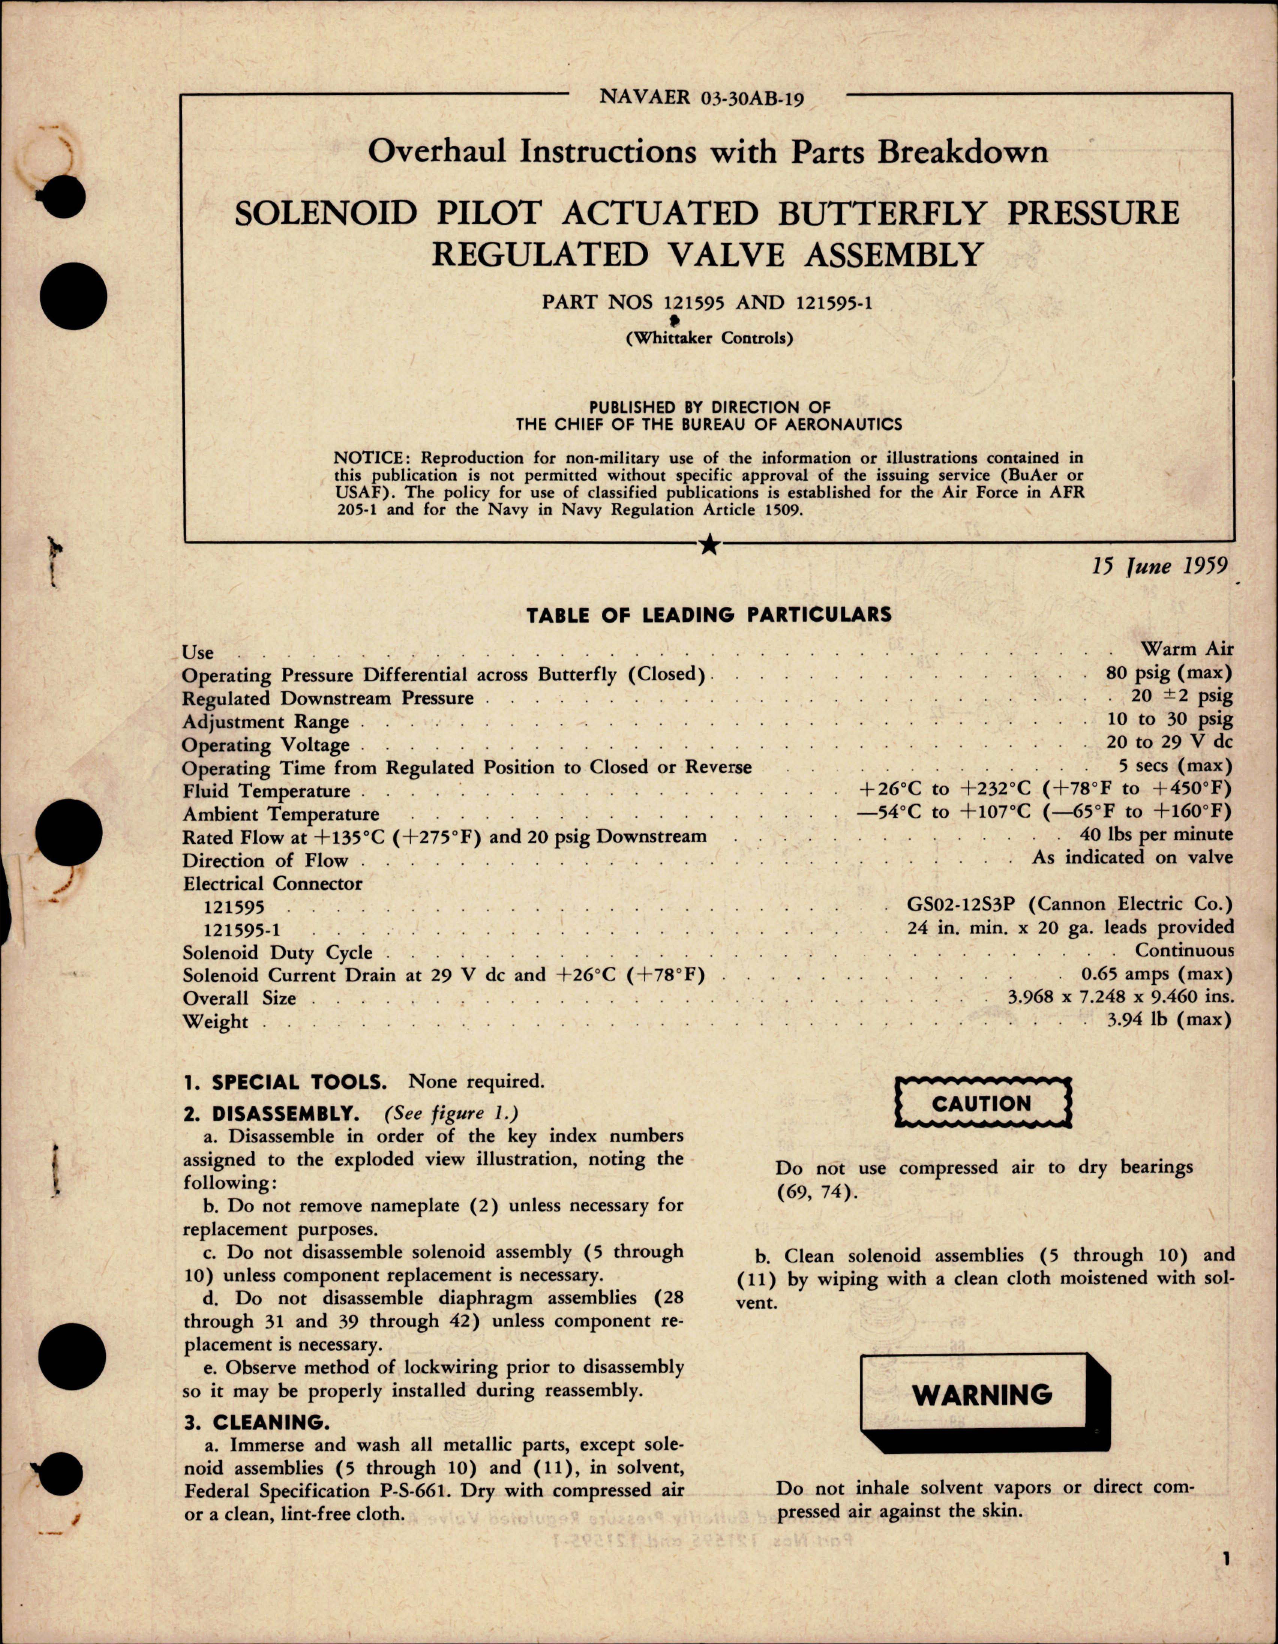 Sample page 1 from AirCorps Library document: Overhaul Instructions with Parts for Solenoid Pilot Actuated Butterfly Pressure Regulated Valve Assembly - Parts 121595 and 121595-1